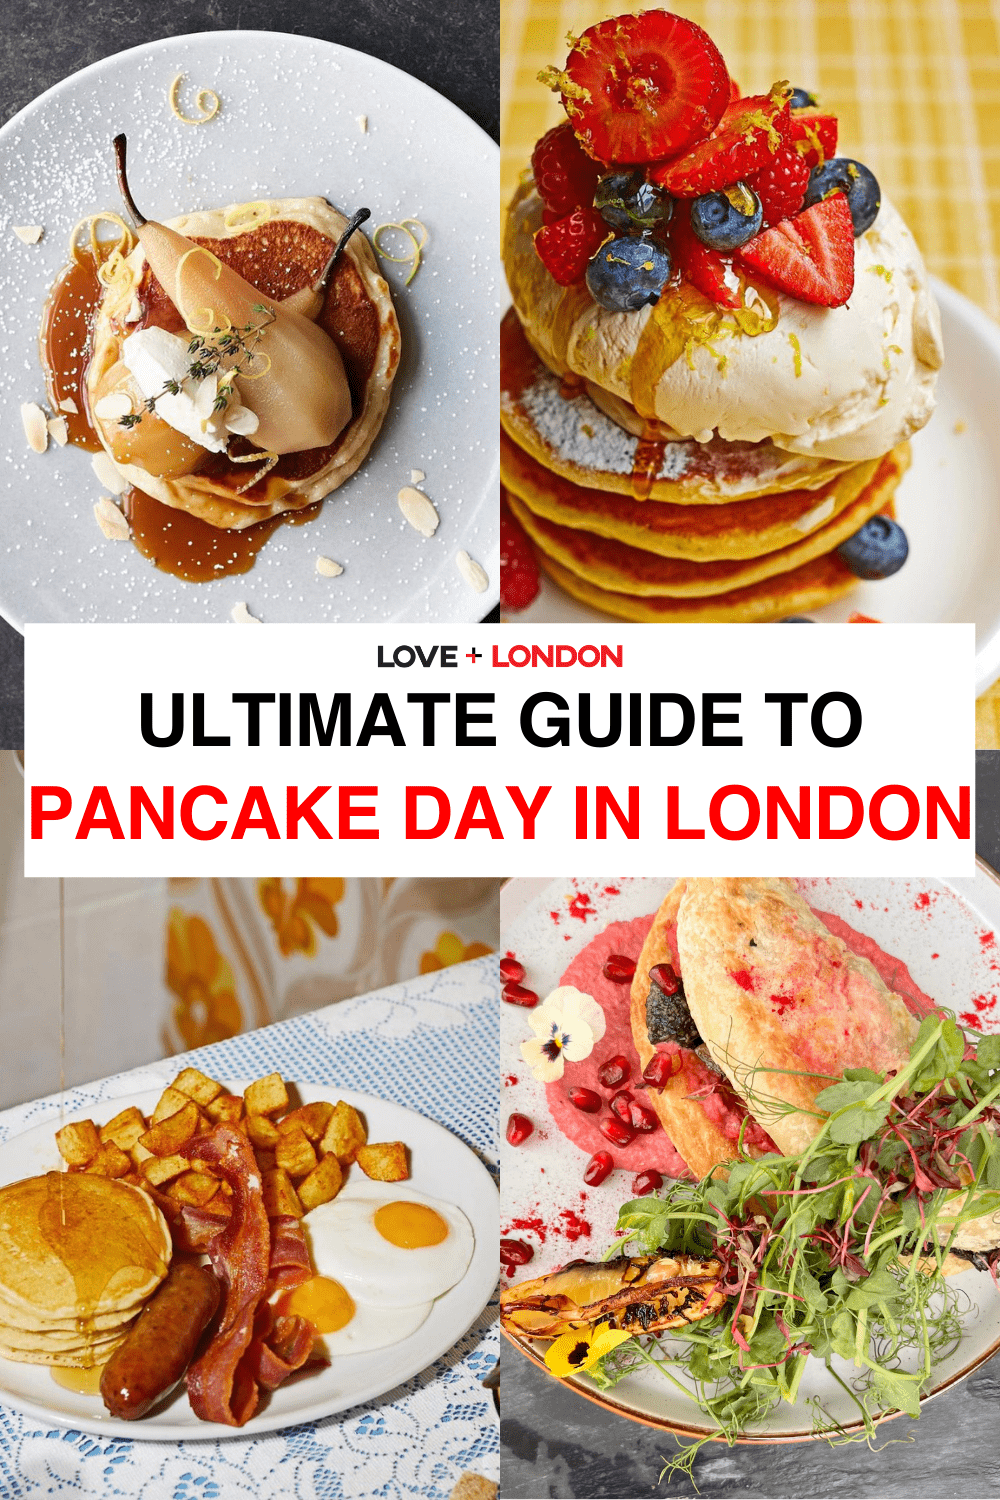 What to do on Pancake Day in London - pancake day is an event in London in February or March, during which it's perfectly acceptable to have pancakes in London for dinner. Click through to find out more about Pancake day in london